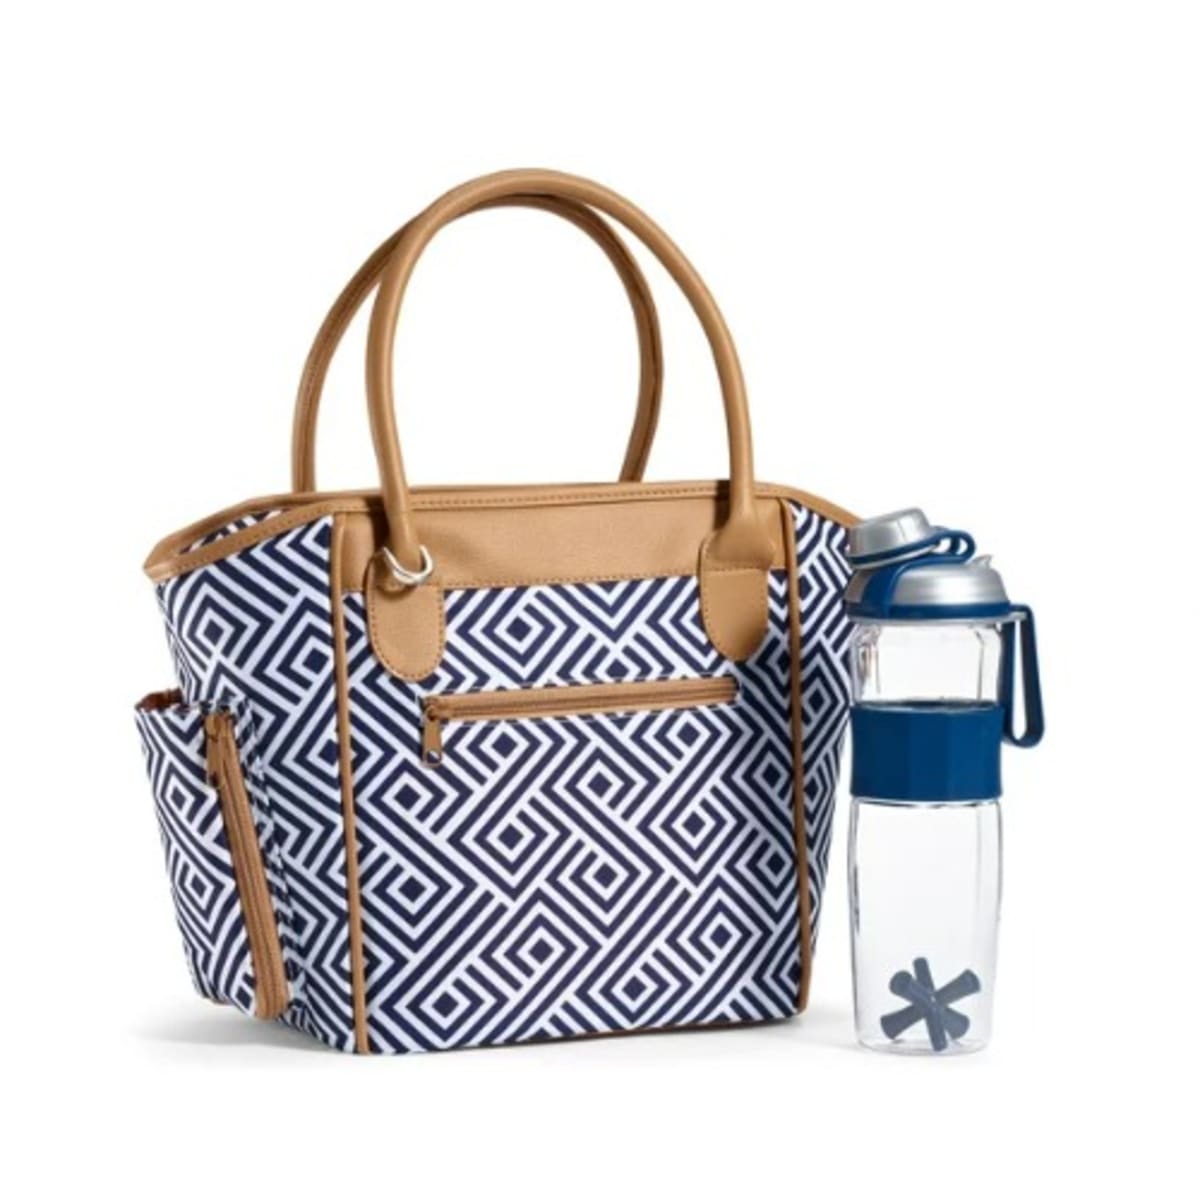 Lotg Women's Insulated Lunch Tote with 20oz Water Bottle, Blue, Size: One Size